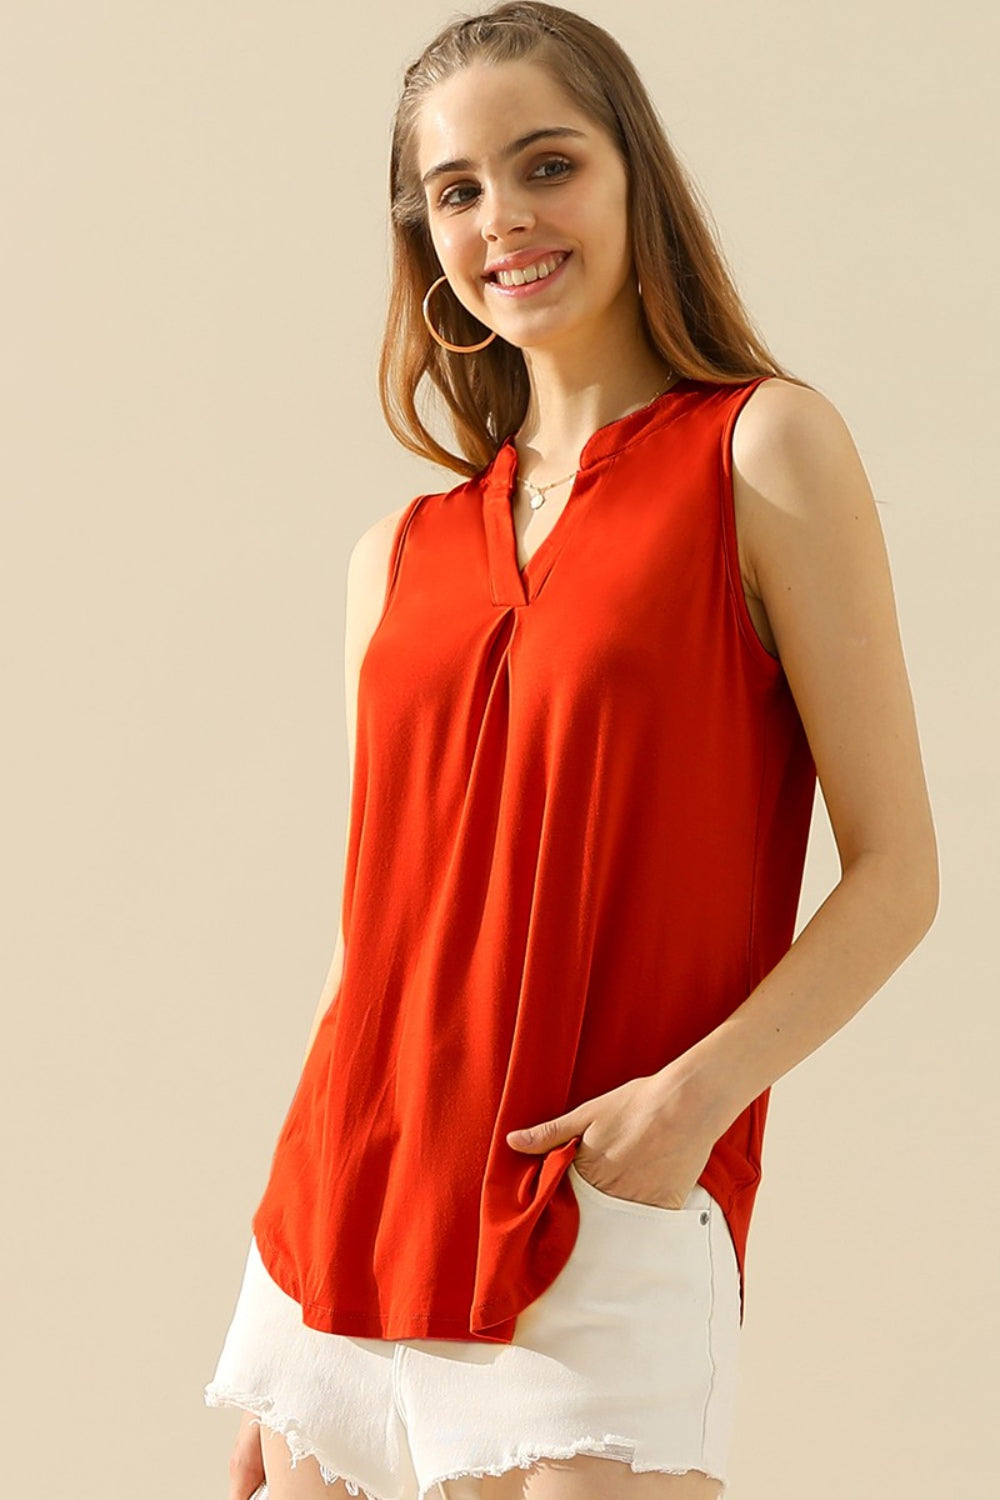 Chic And Stylish Notched Top (10 Colors) - Joy & Country